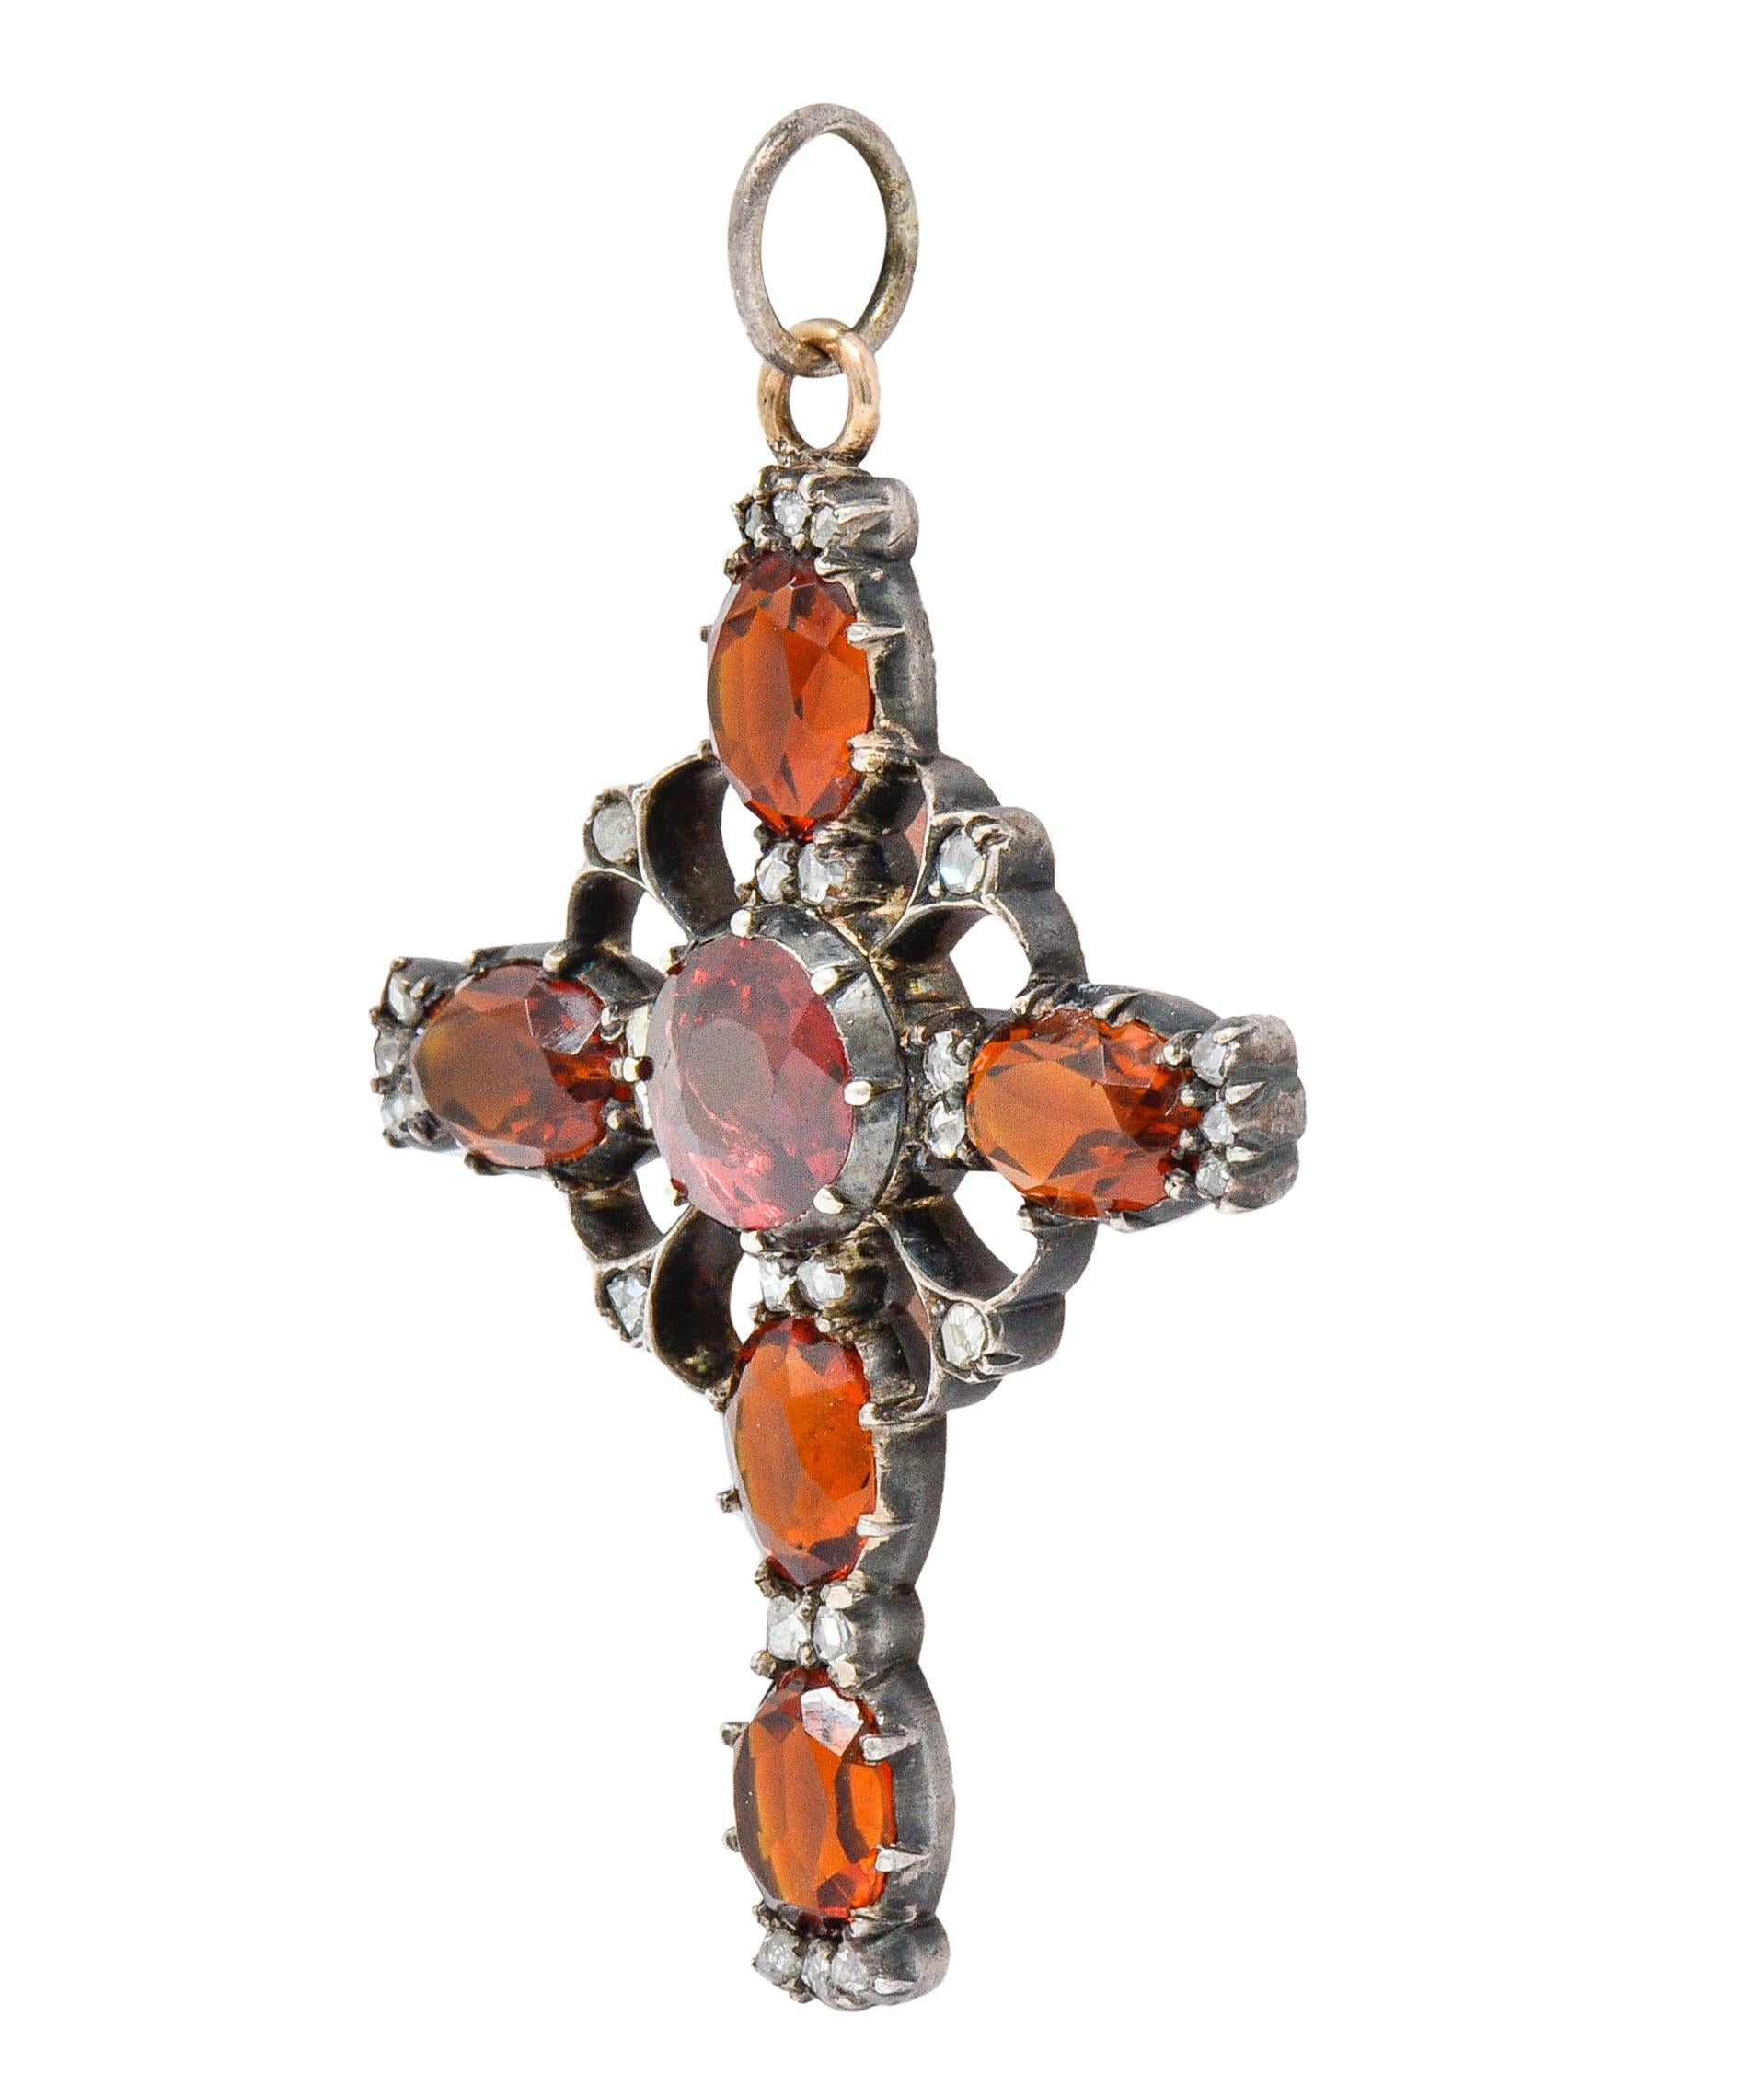 Designed as an ornate cross with a circular center and gemmed extensions

Centering a 8.3 mm round cut garnet, transparent, with medium-light red color

Surrounded by oval cut citrine measuring approximately 8.0 x 6.0 mm

Very well-matched in smokey